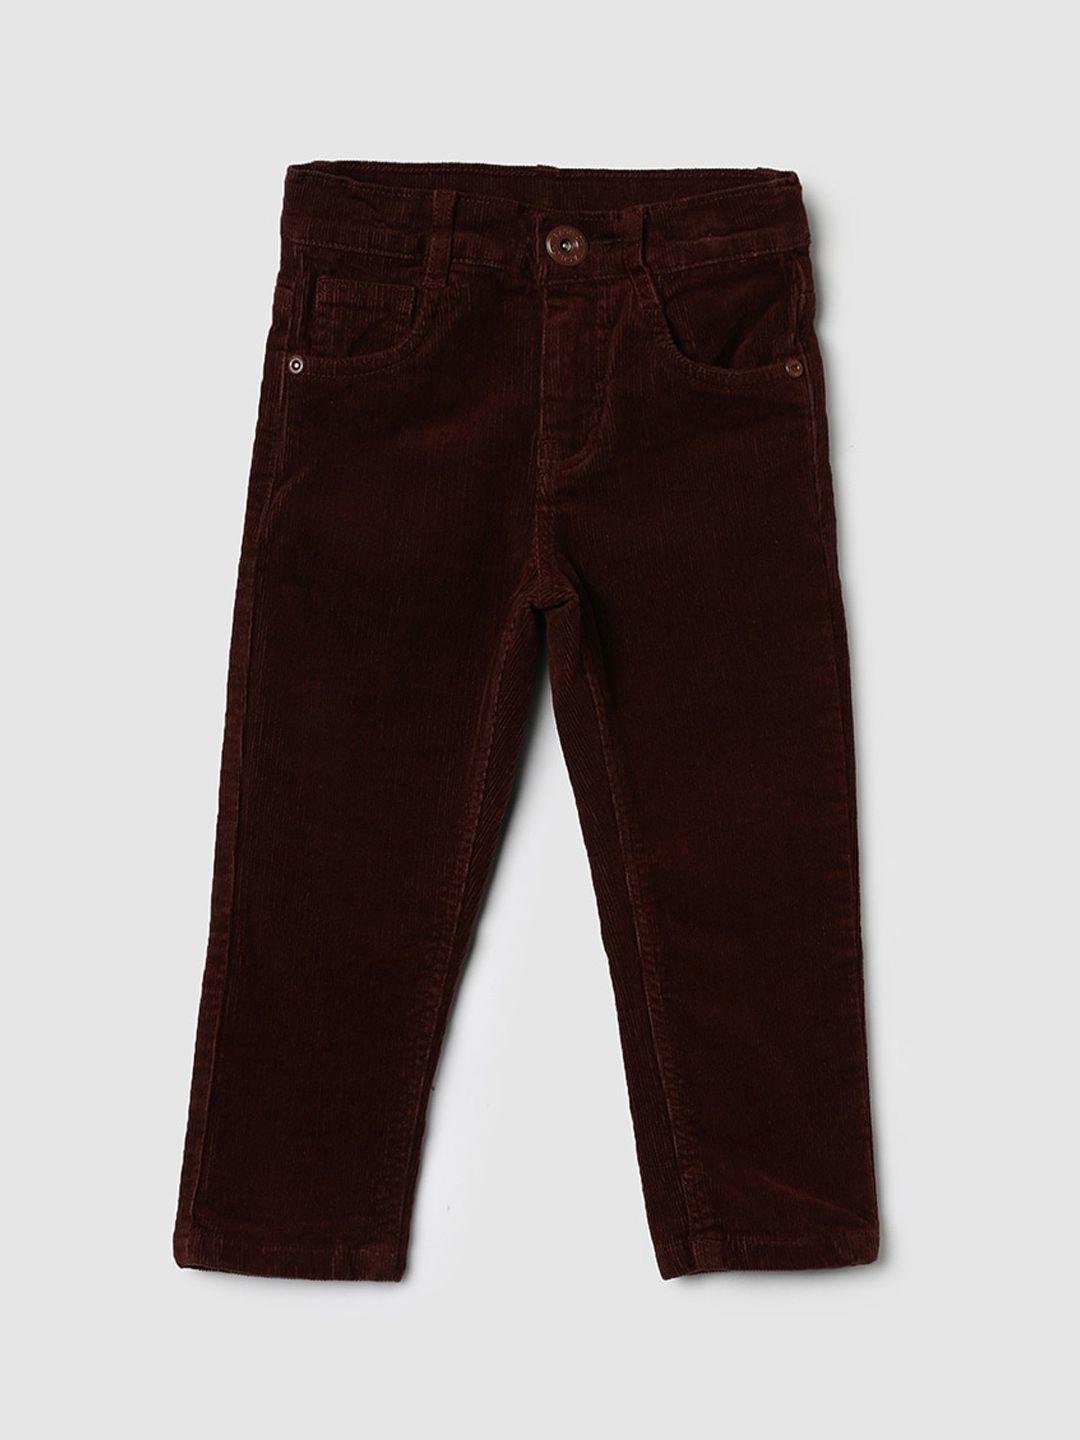 max boys brown trousers